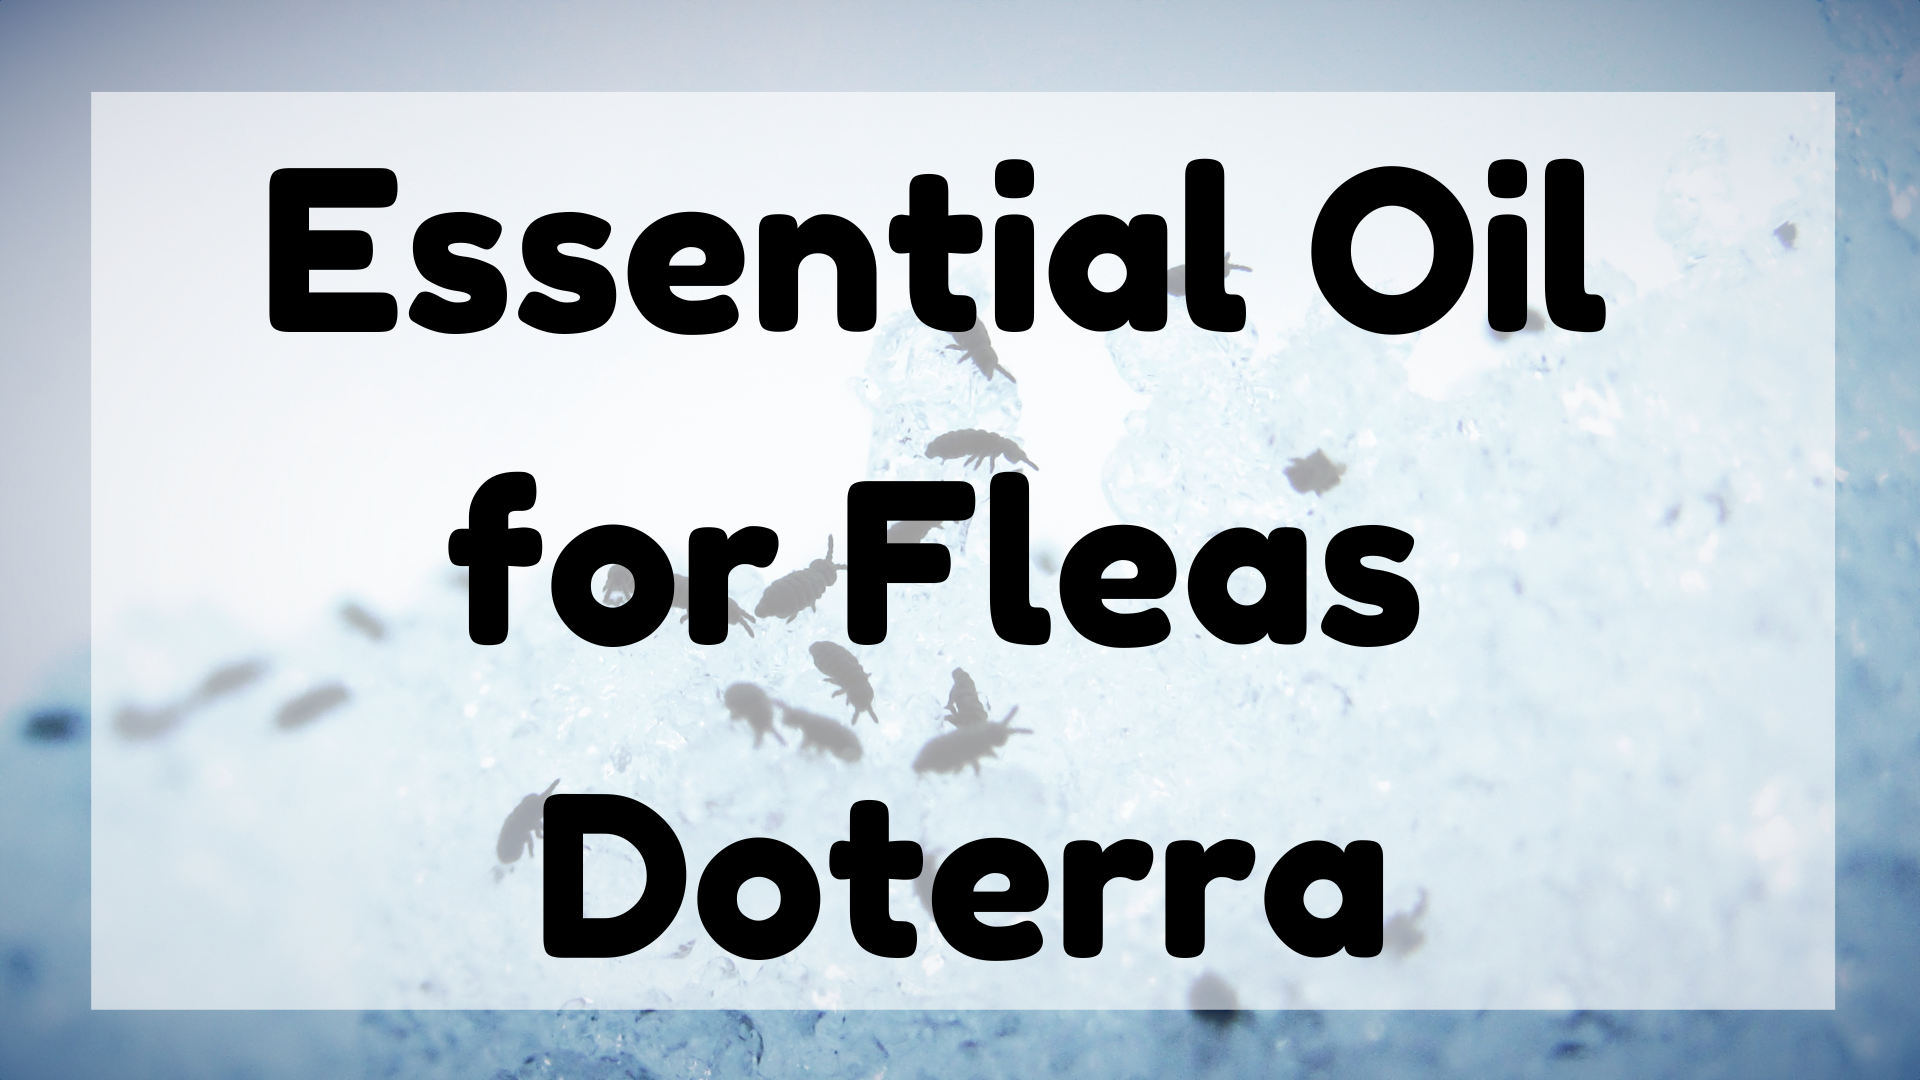 Essential Oil for Fleas Doterra featured image